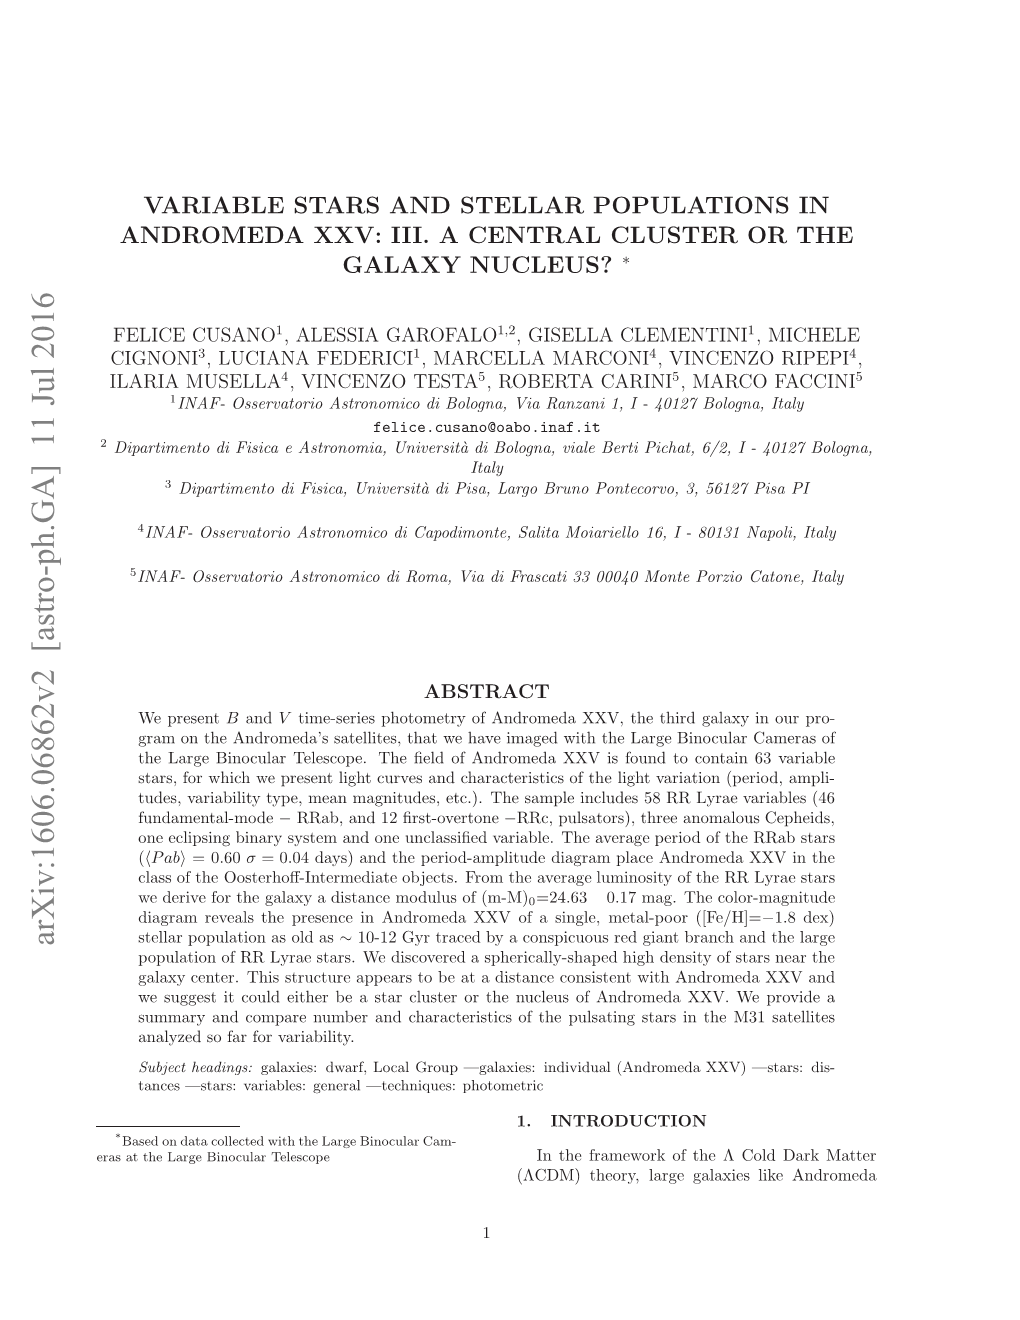 Variable Stars and Stellar Populations in Andromeda XXV: III. a Central